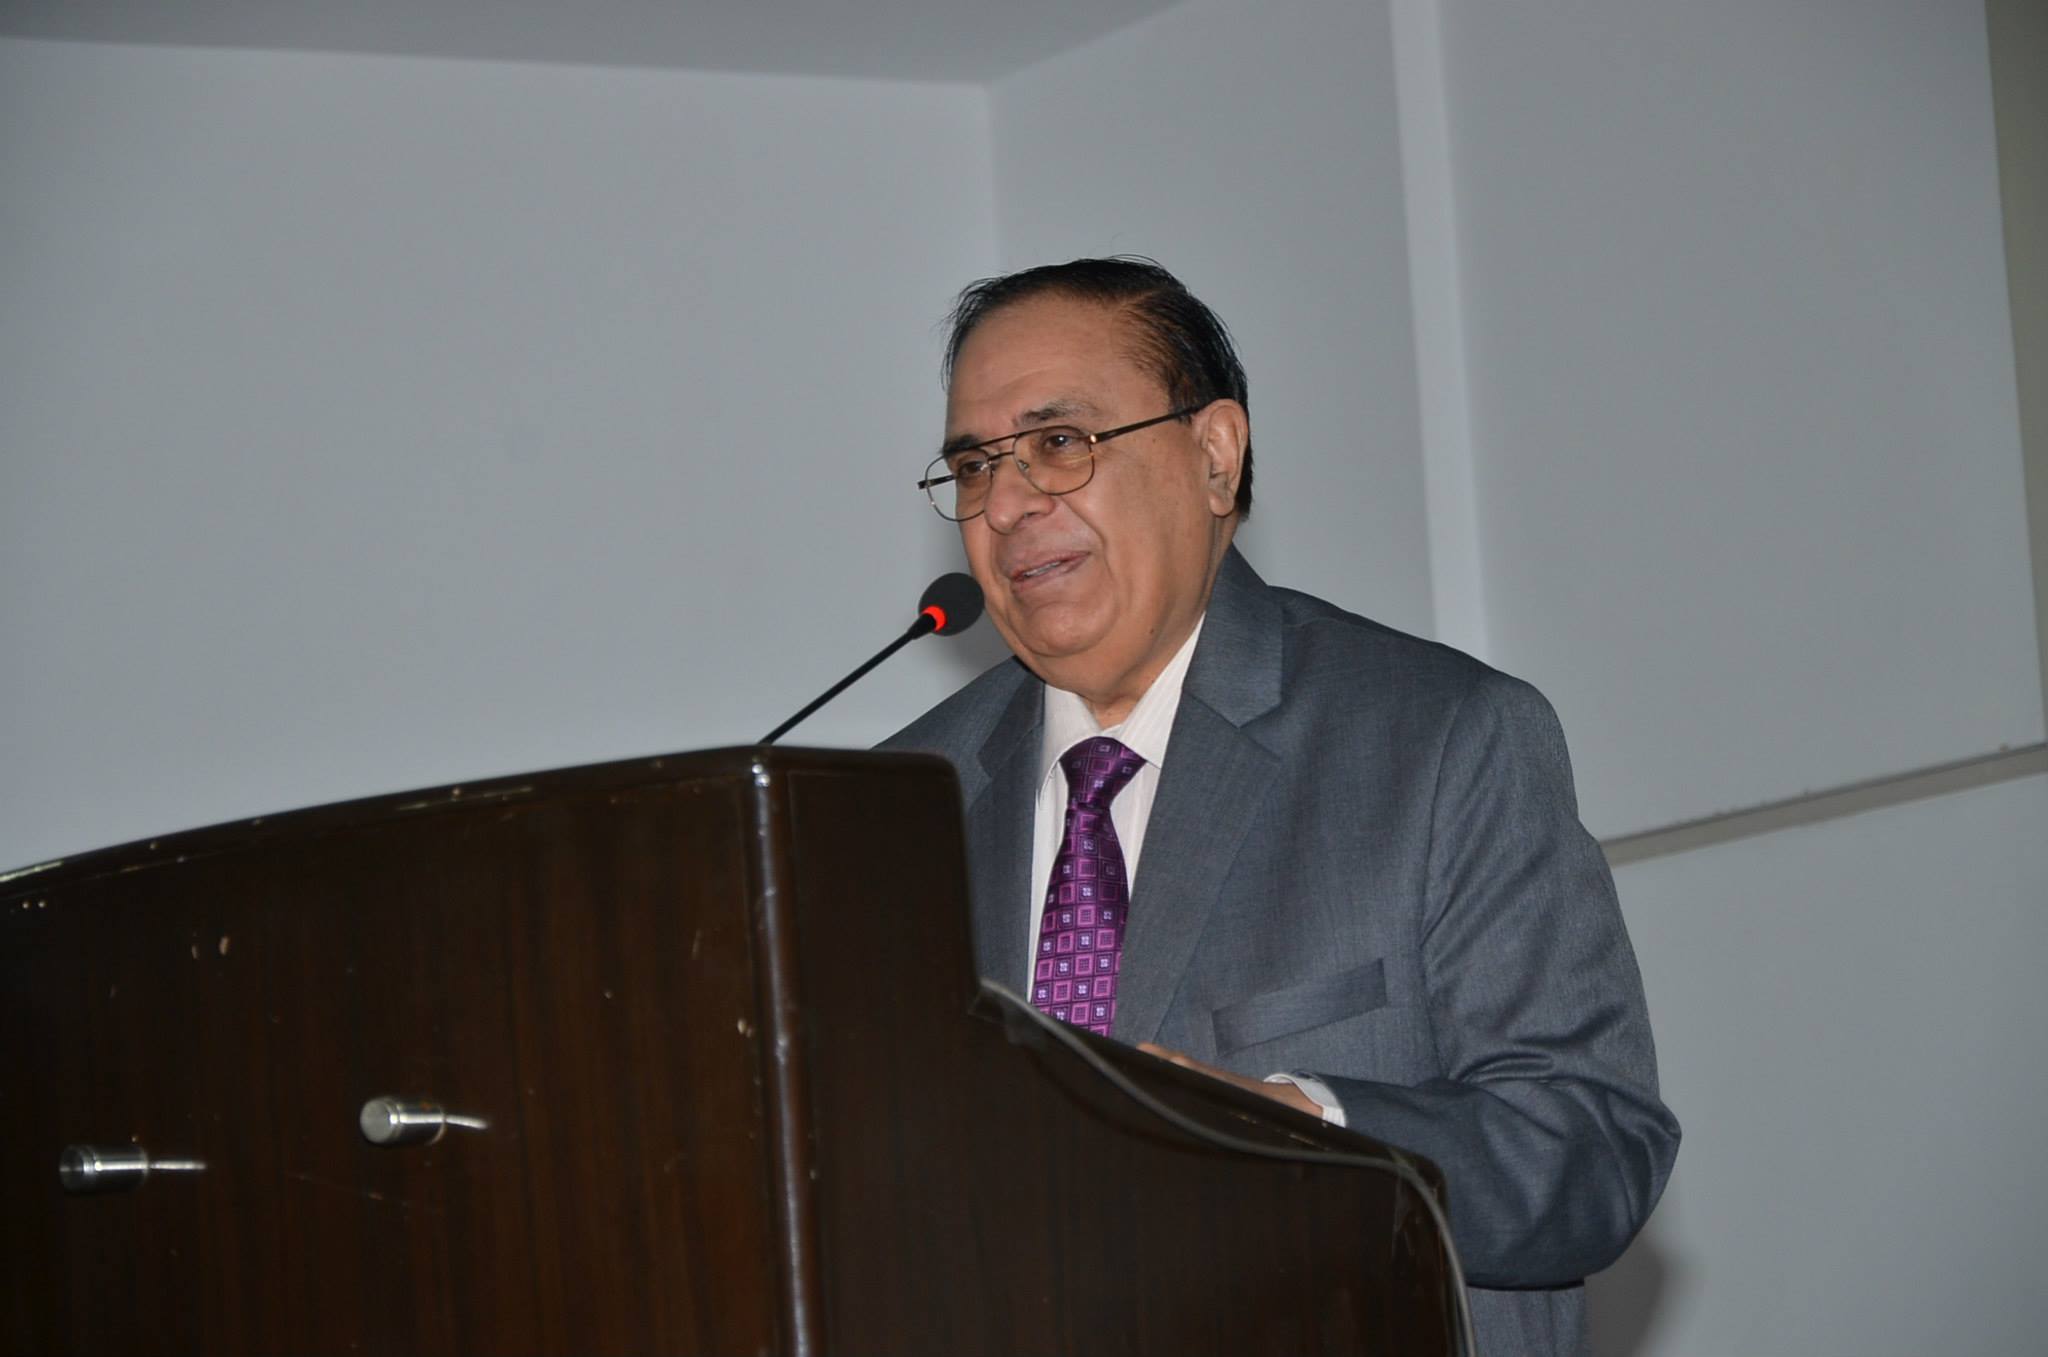 dr attaur rehman addressing students at dha suffa university photo dha suffa university facebook page